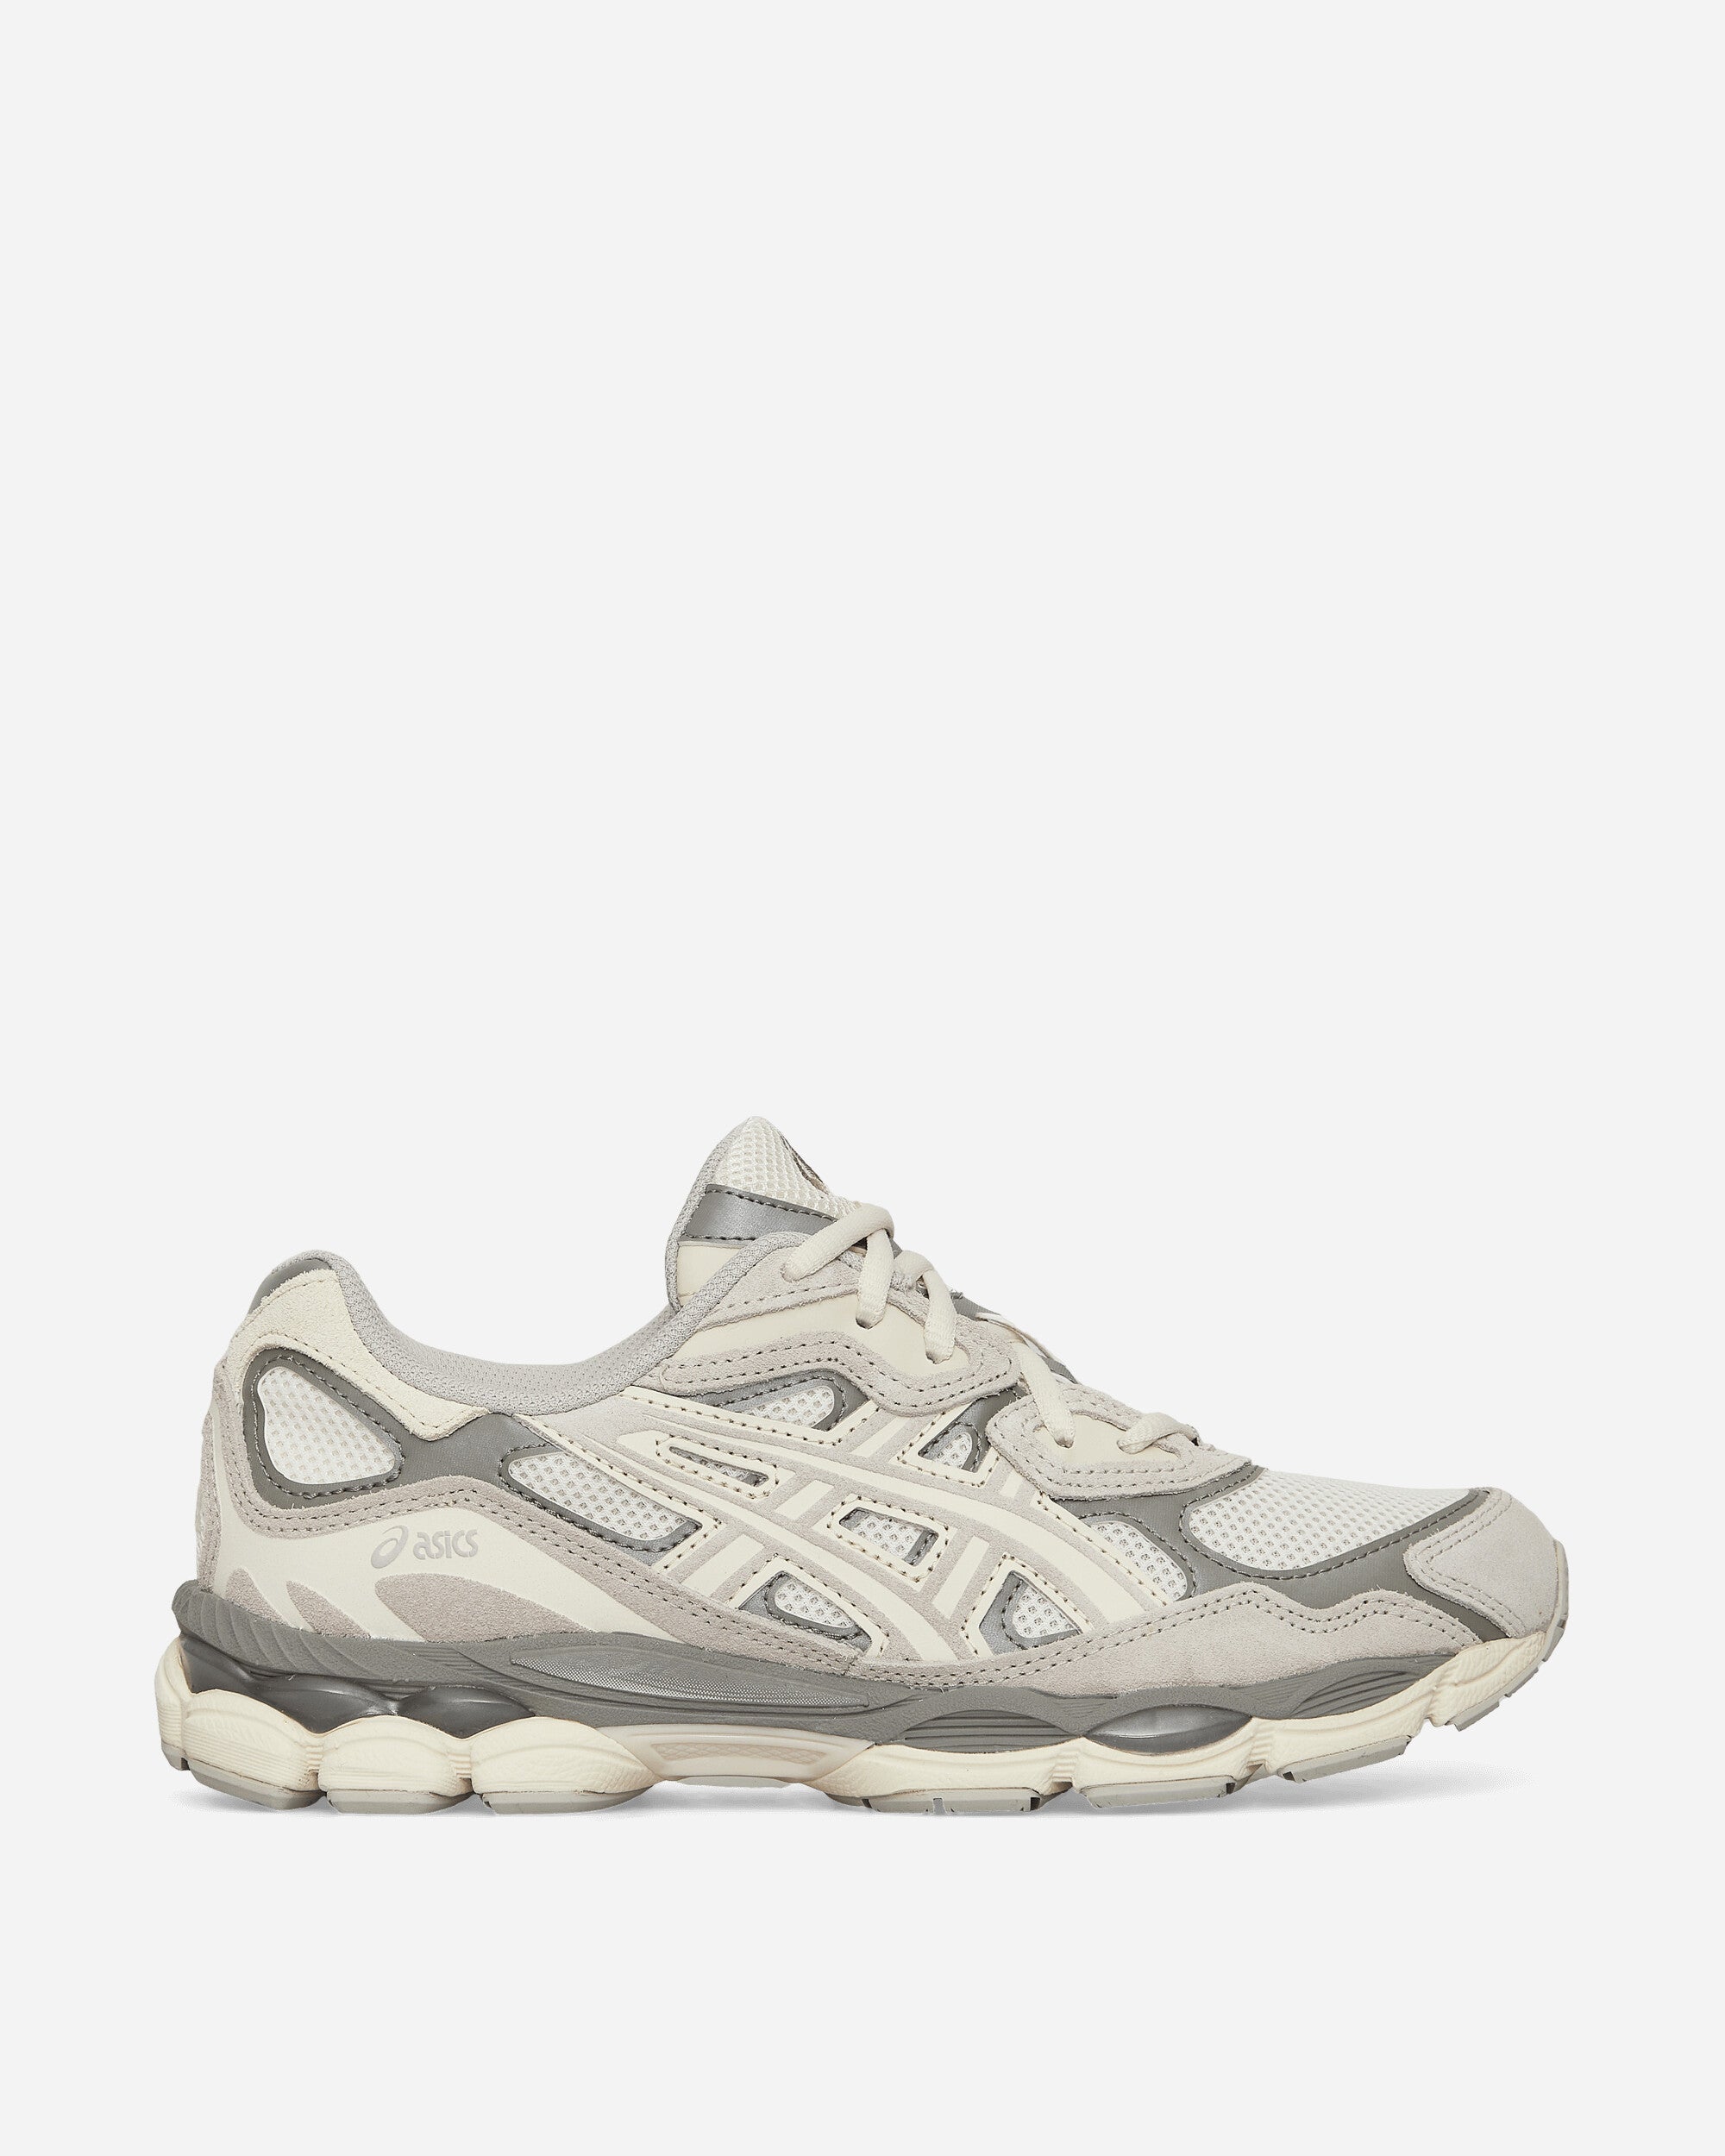 Asics GEL-NYC Sneakers Cream / Oyster Grey - Slam Official Store